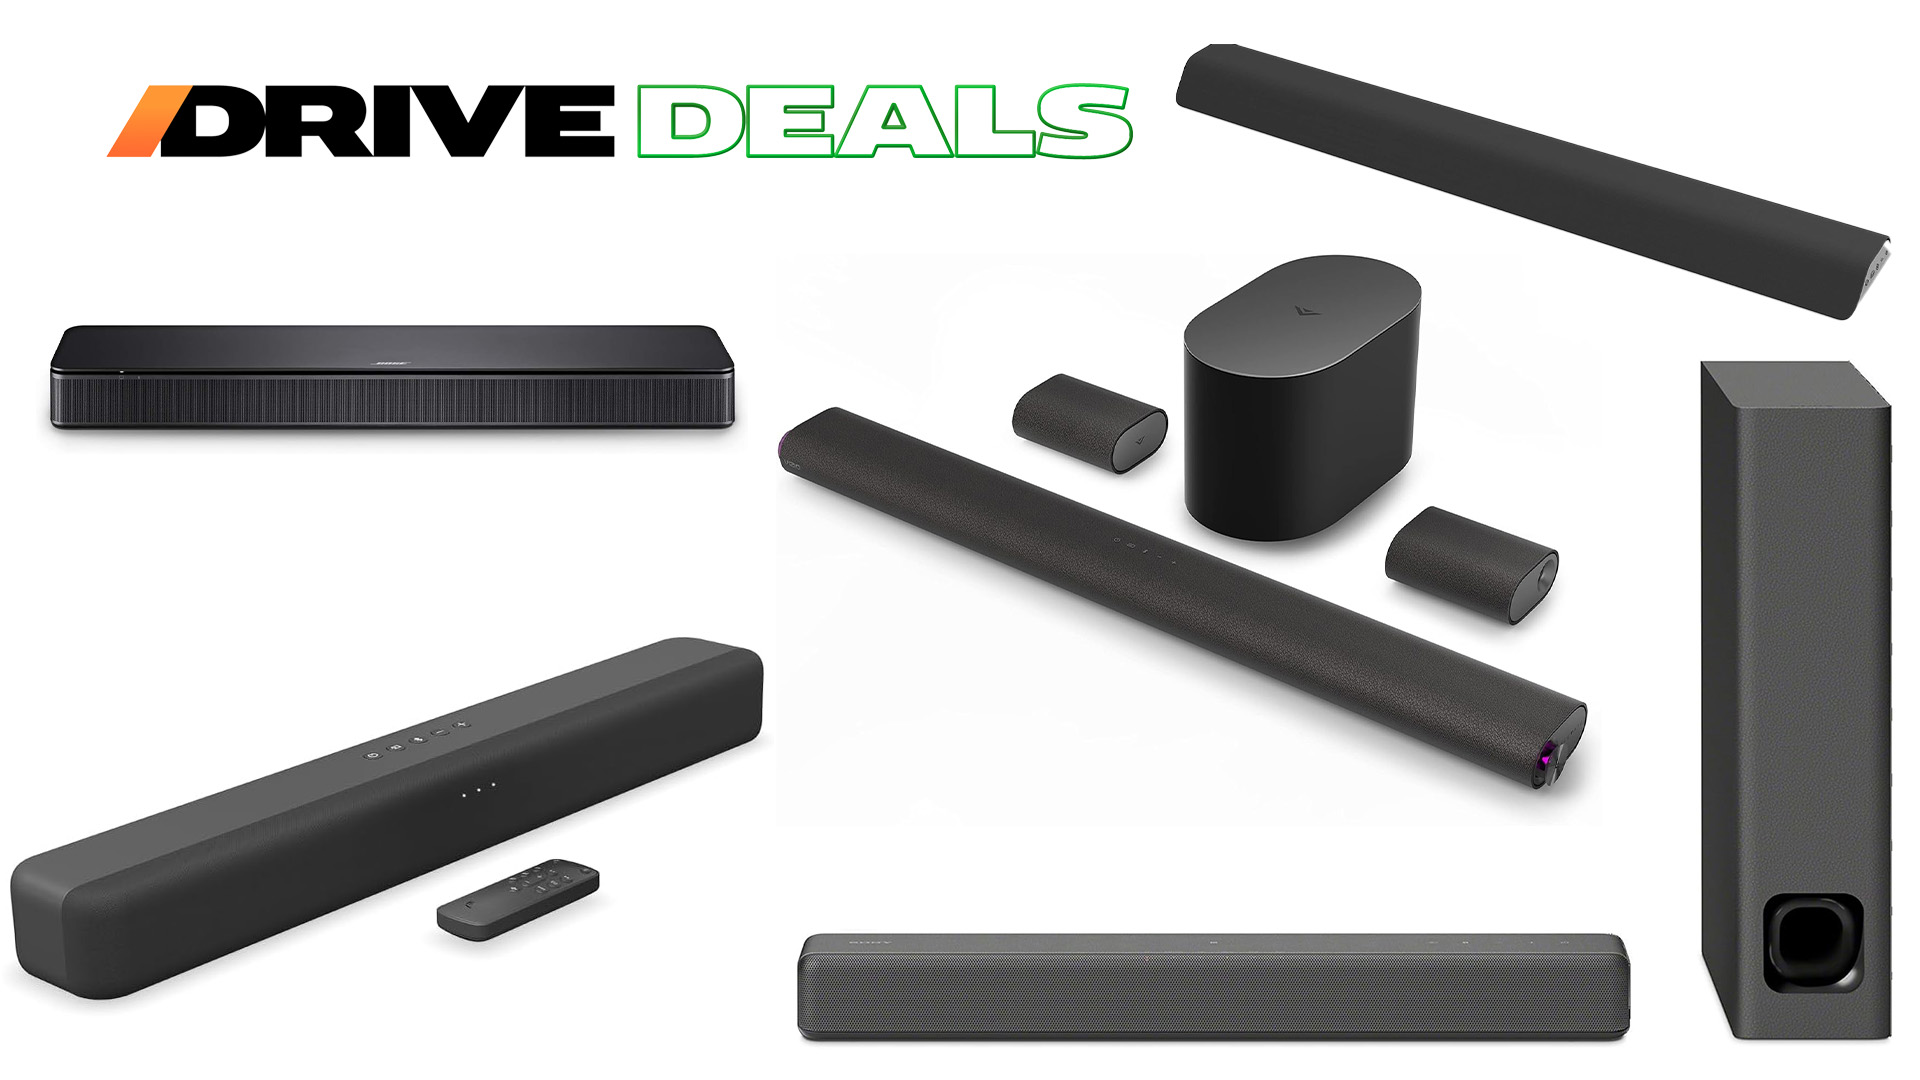 Complete Your Home Theater Experience With These Killer TV and Soundbar Deals